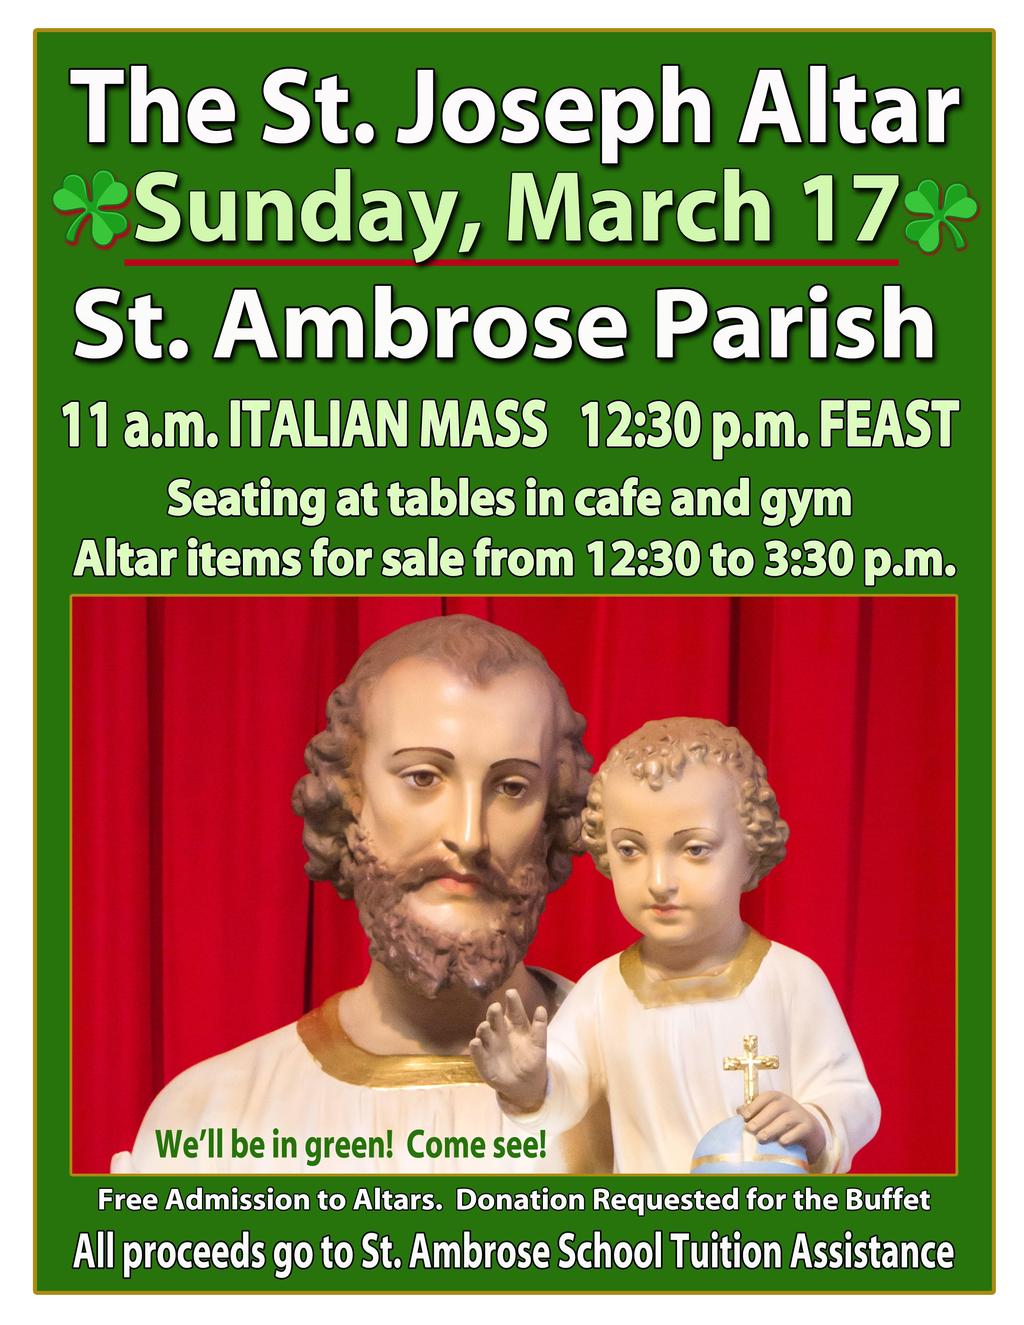 Cake and Cookies Needed for St, JoSeph S AltAr Please consider baking or buying a cake or other goodies to place on his altar to sell.